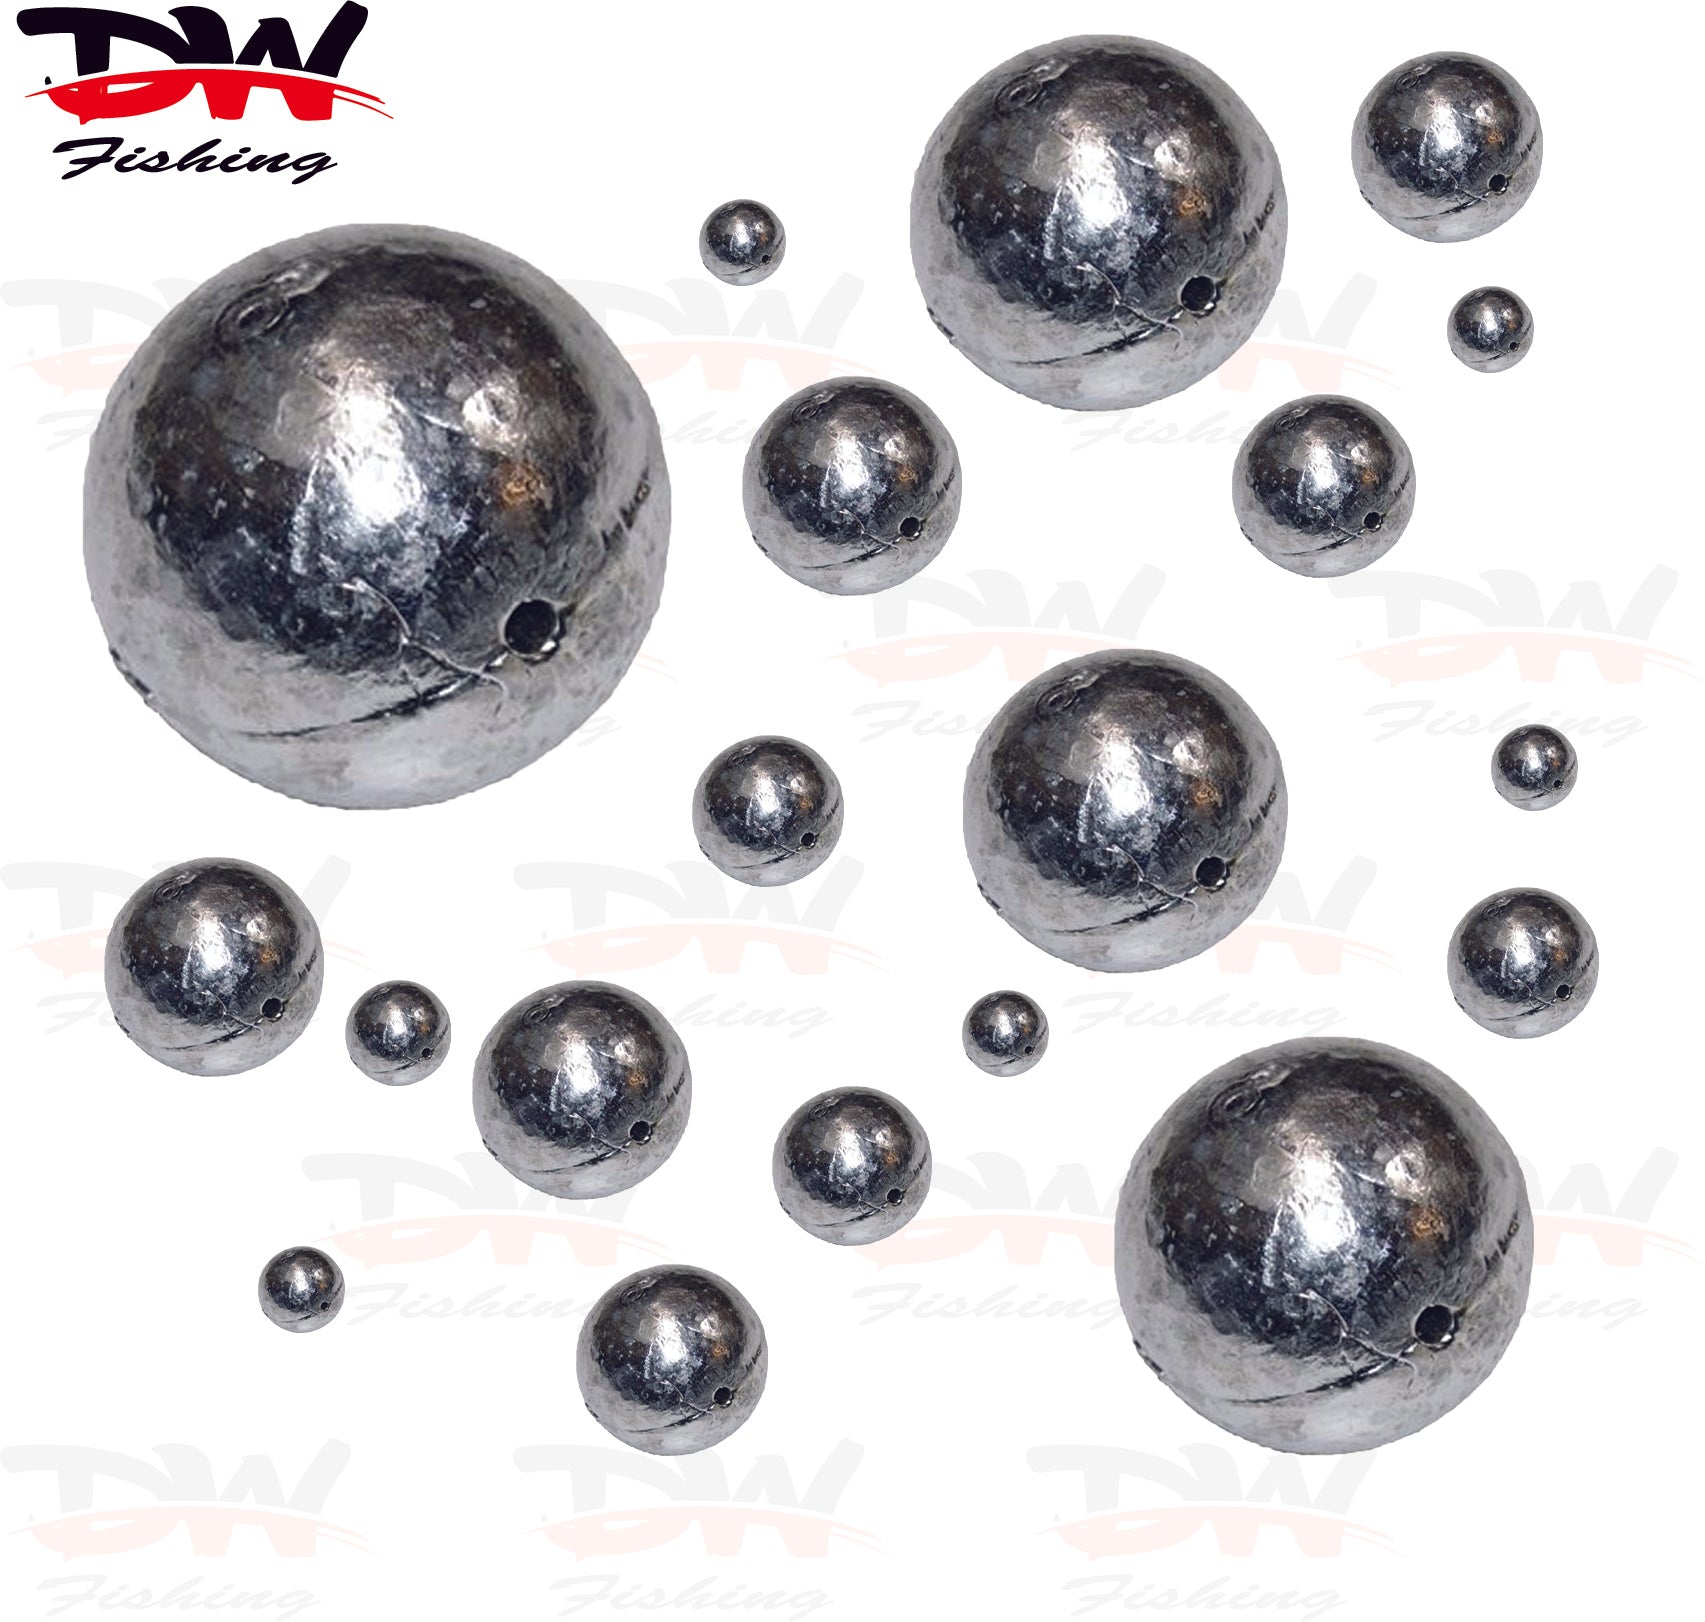 Ball Sinkers DW Fishing Value pack